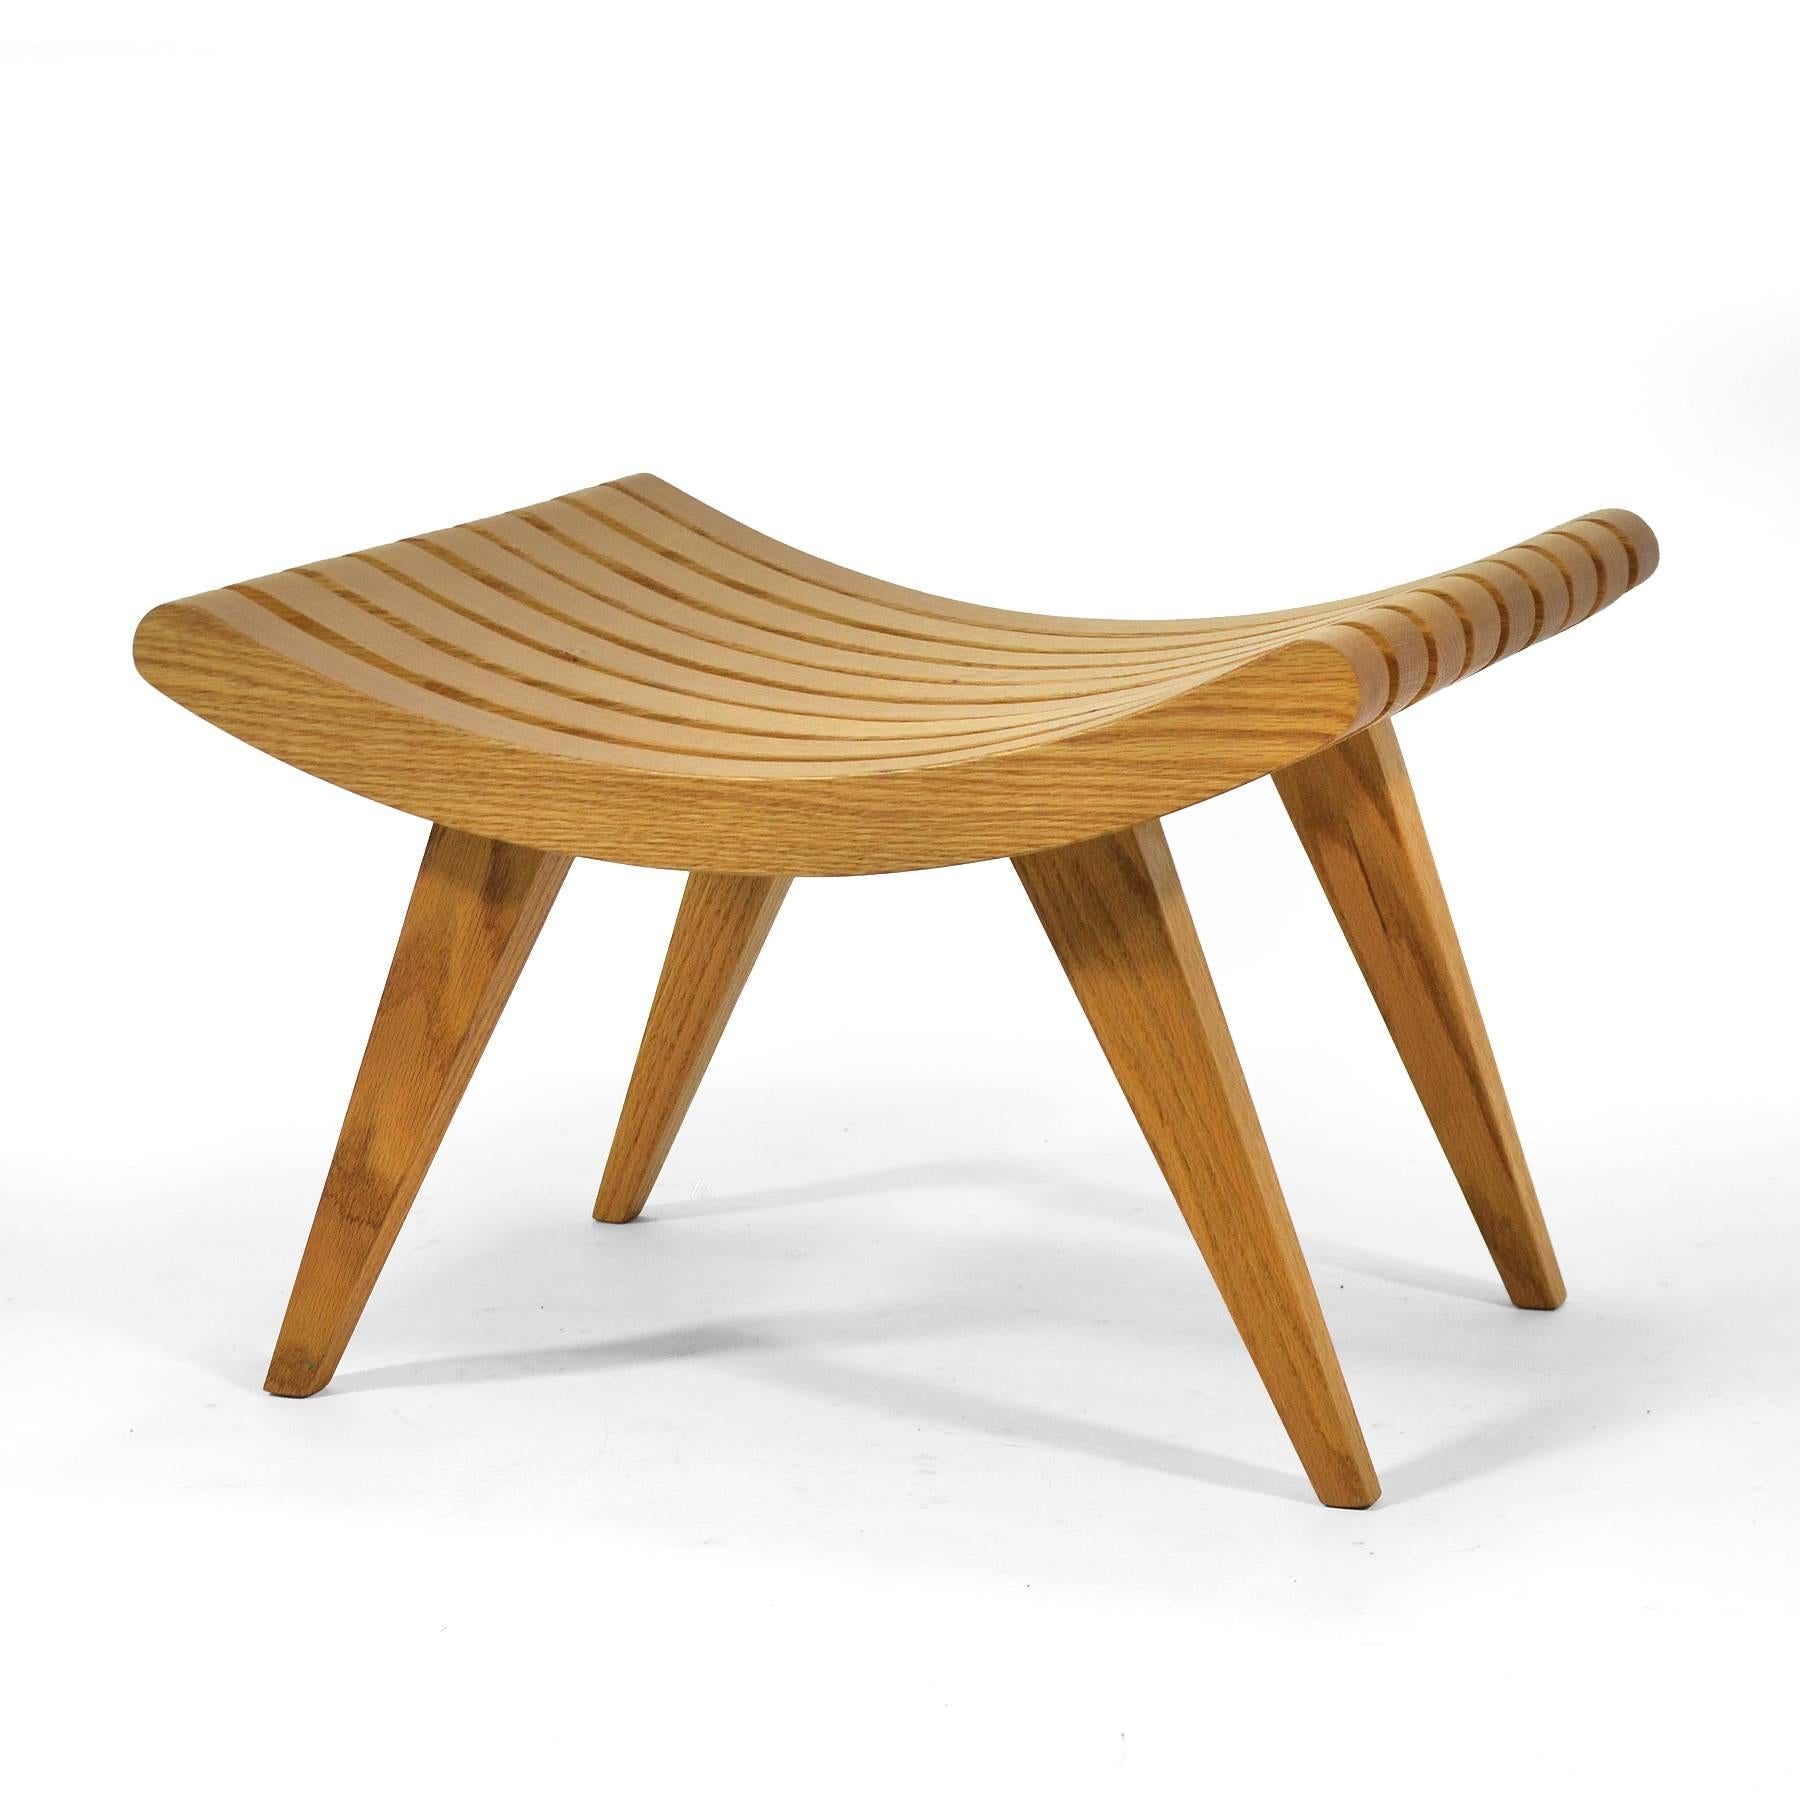 This handsome 1945 design by Edward Durell Stone was made by Fulbright furniture. A great occasional piece, the oak bench is both a sculptural presence and a comfortable seat.